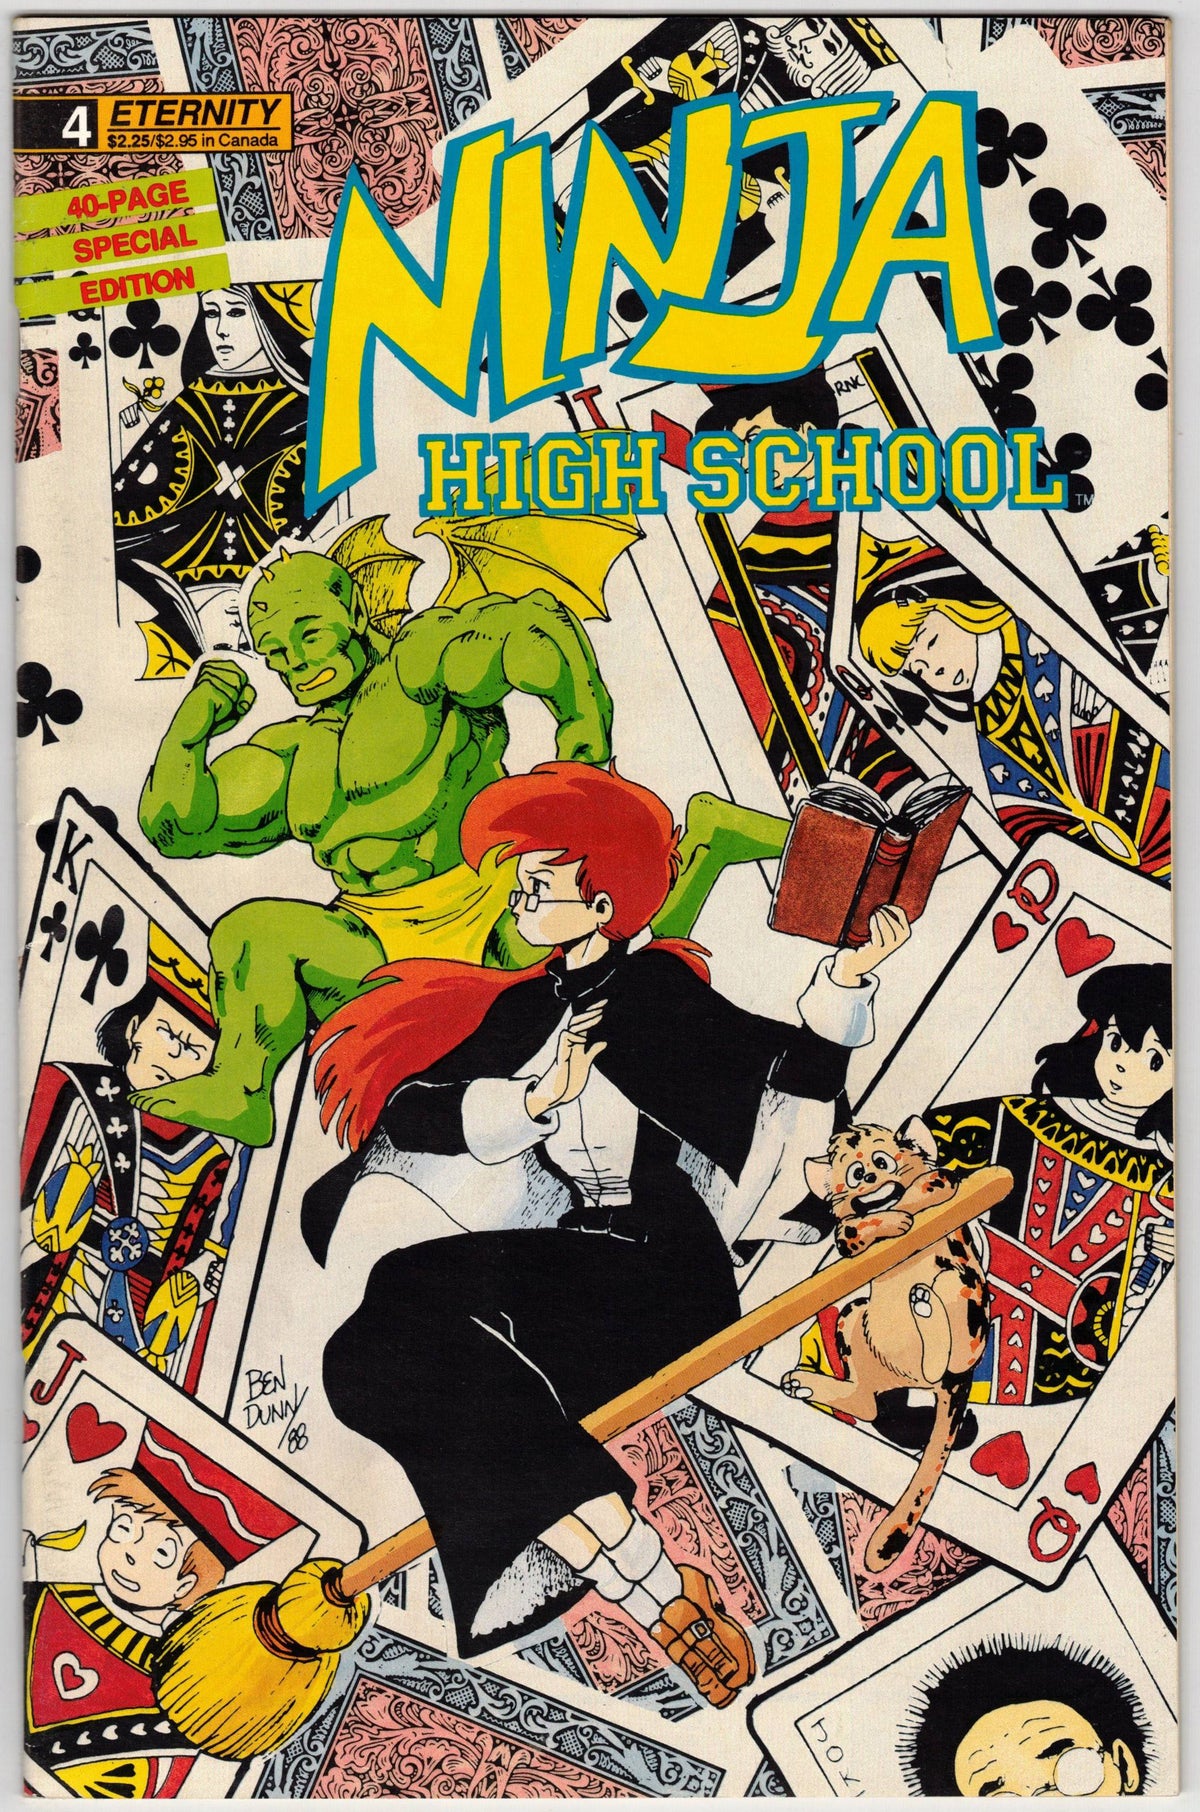 Photo of Ninja High School: The Special Edition (1989) Issue 4 - Comic sold by Stronghold Collectibles